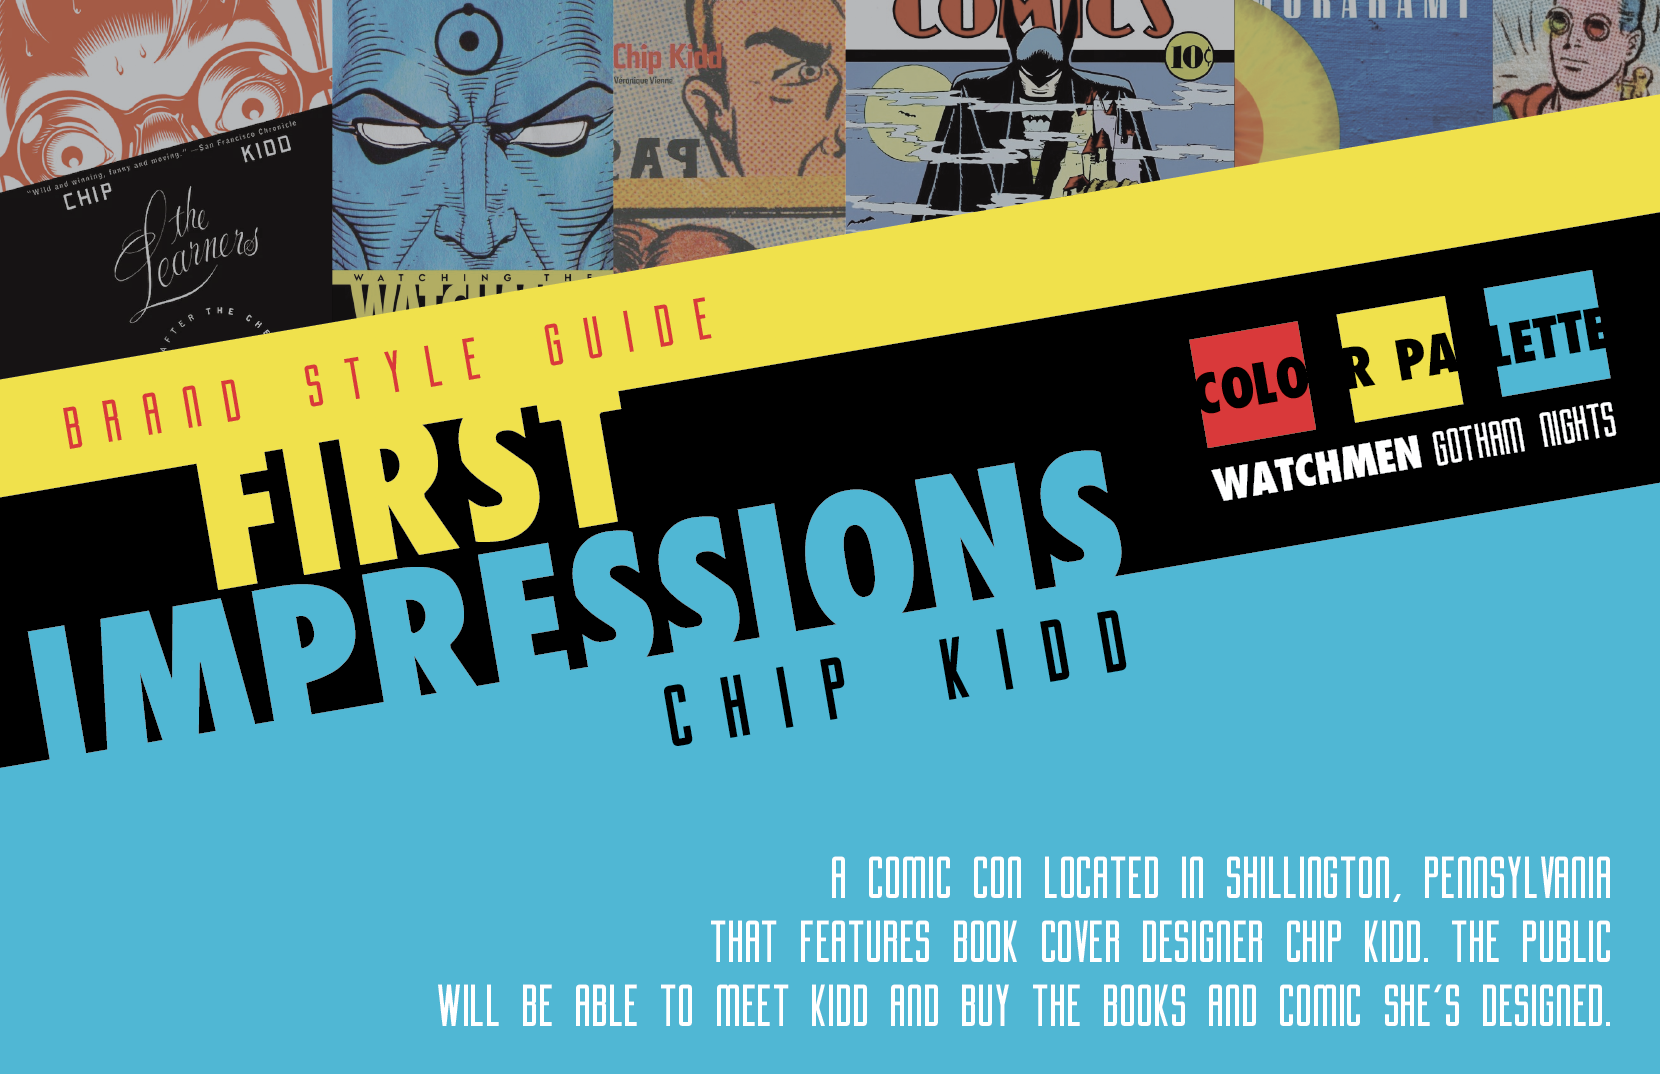 Style guide for Chip Kidd Comic Con with fonts like Watchmen and Gotham Heights; inspired by DC Comics.